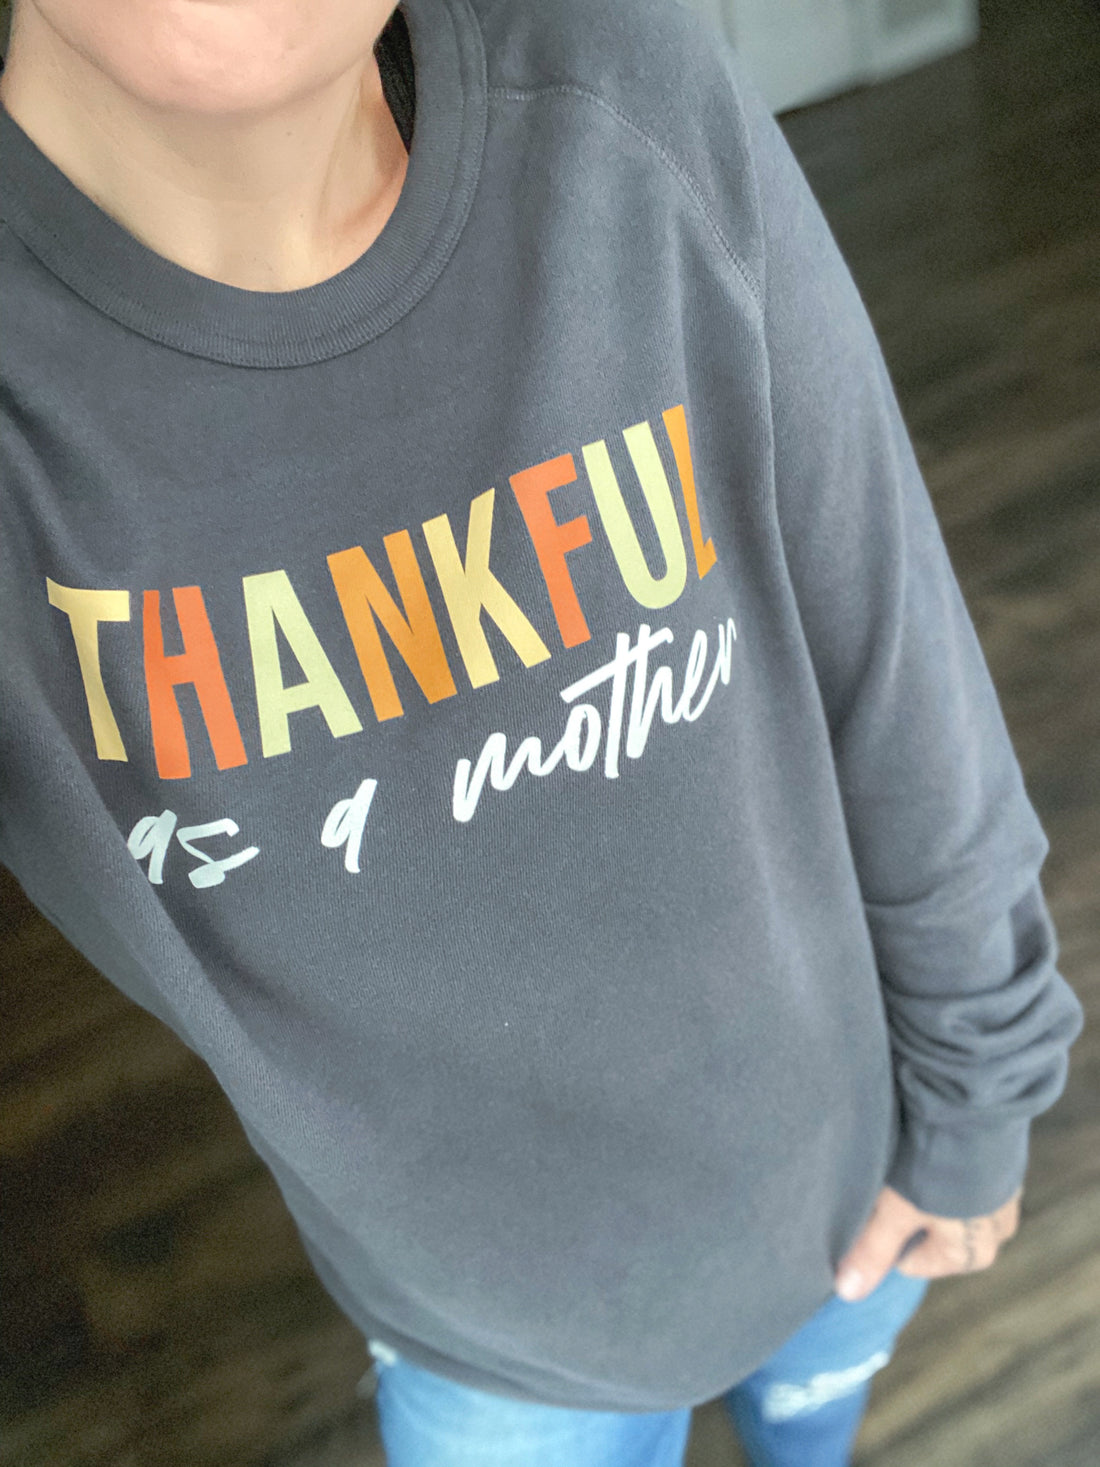 Thankful as a Mother PULLOVER [Ships in 3-5 business days]